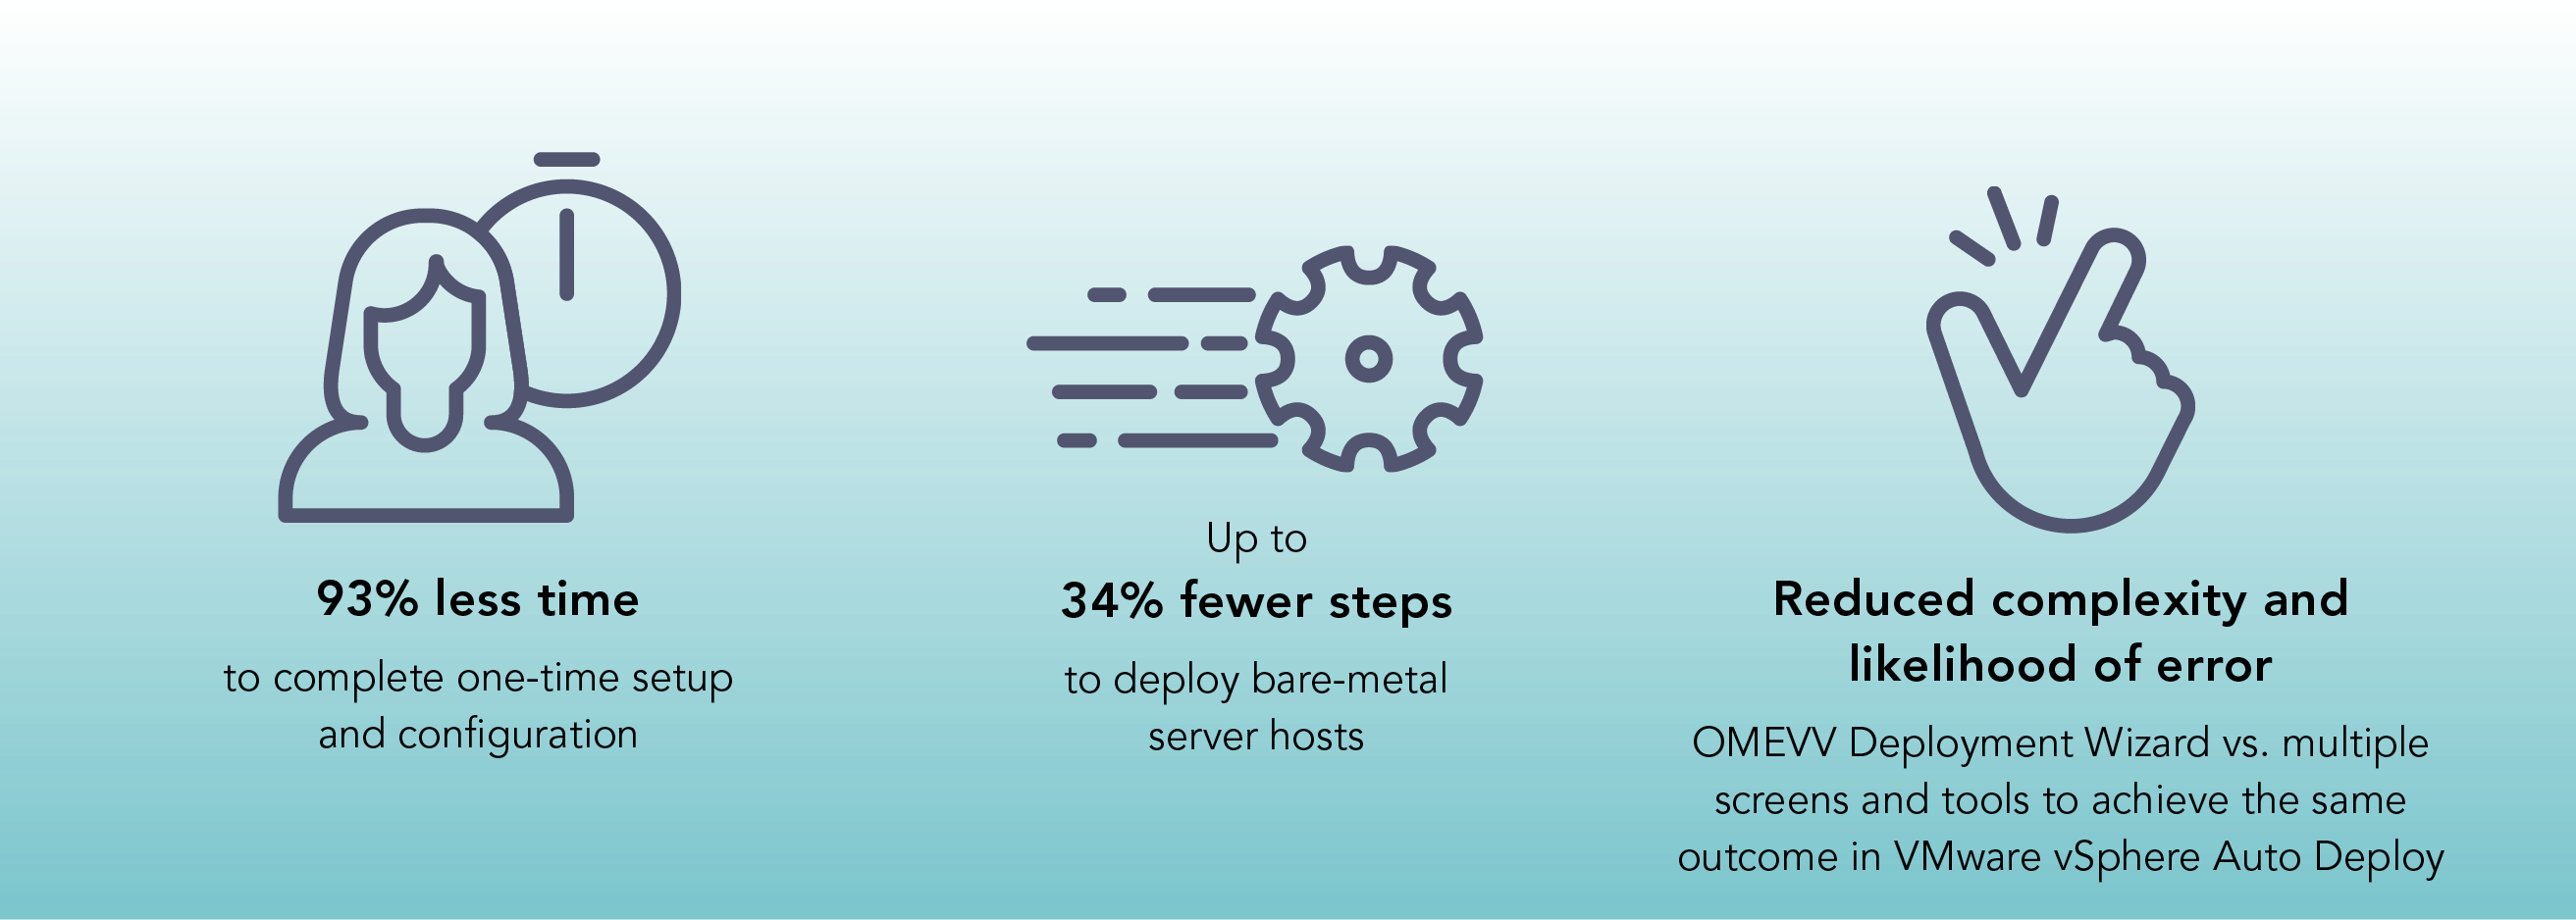 93% less time to complete one-time setup and configuration. Up to 34% fewer steps to deploy bare-metal server hosts. Reduced complexity and likelihood of error OMEW Deployment Wizard vs. multiple screens and tools to achieve the same outcome in VMware vSphere Auto Deploy.